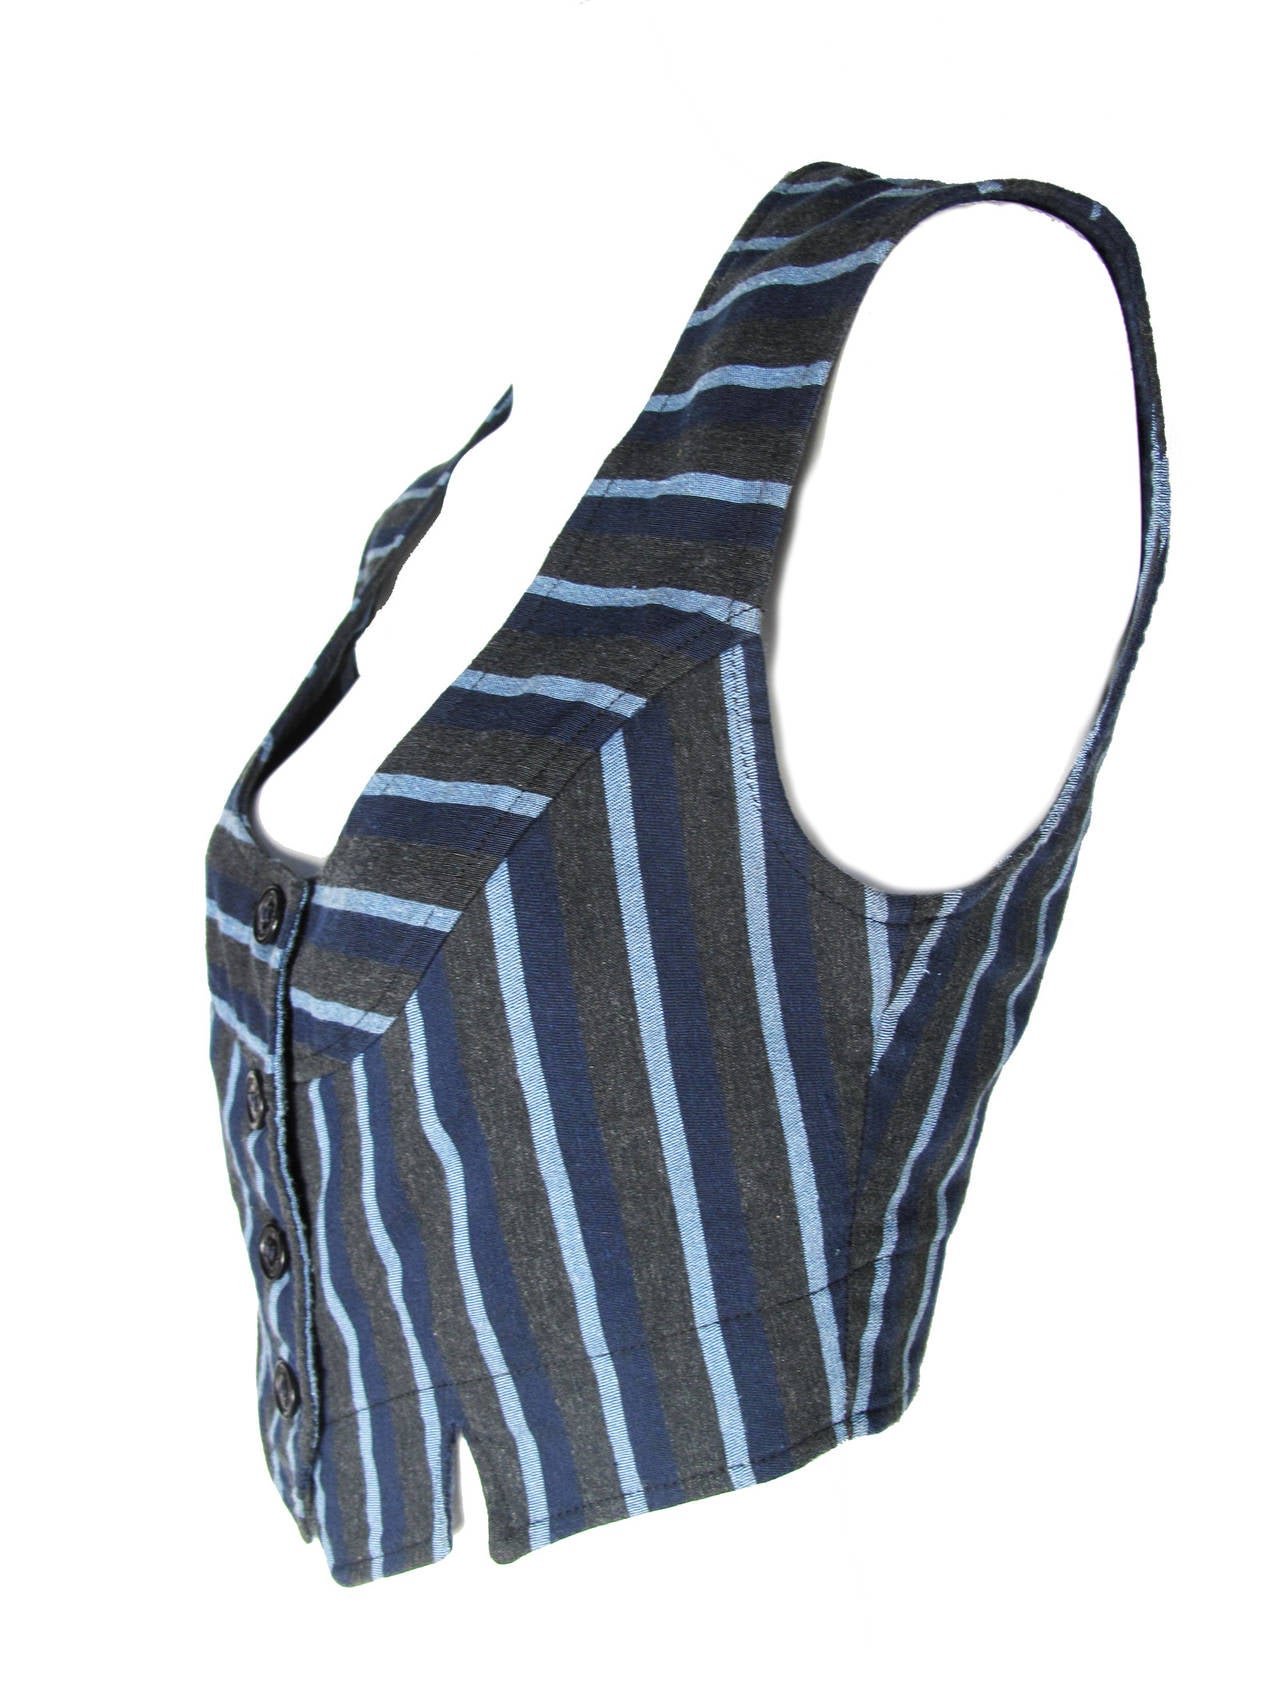 Vivienne Westwood Anglomania cotton light blue, grey and navy striped vest.  Condition: Excellent.  Made in Italy. 
34